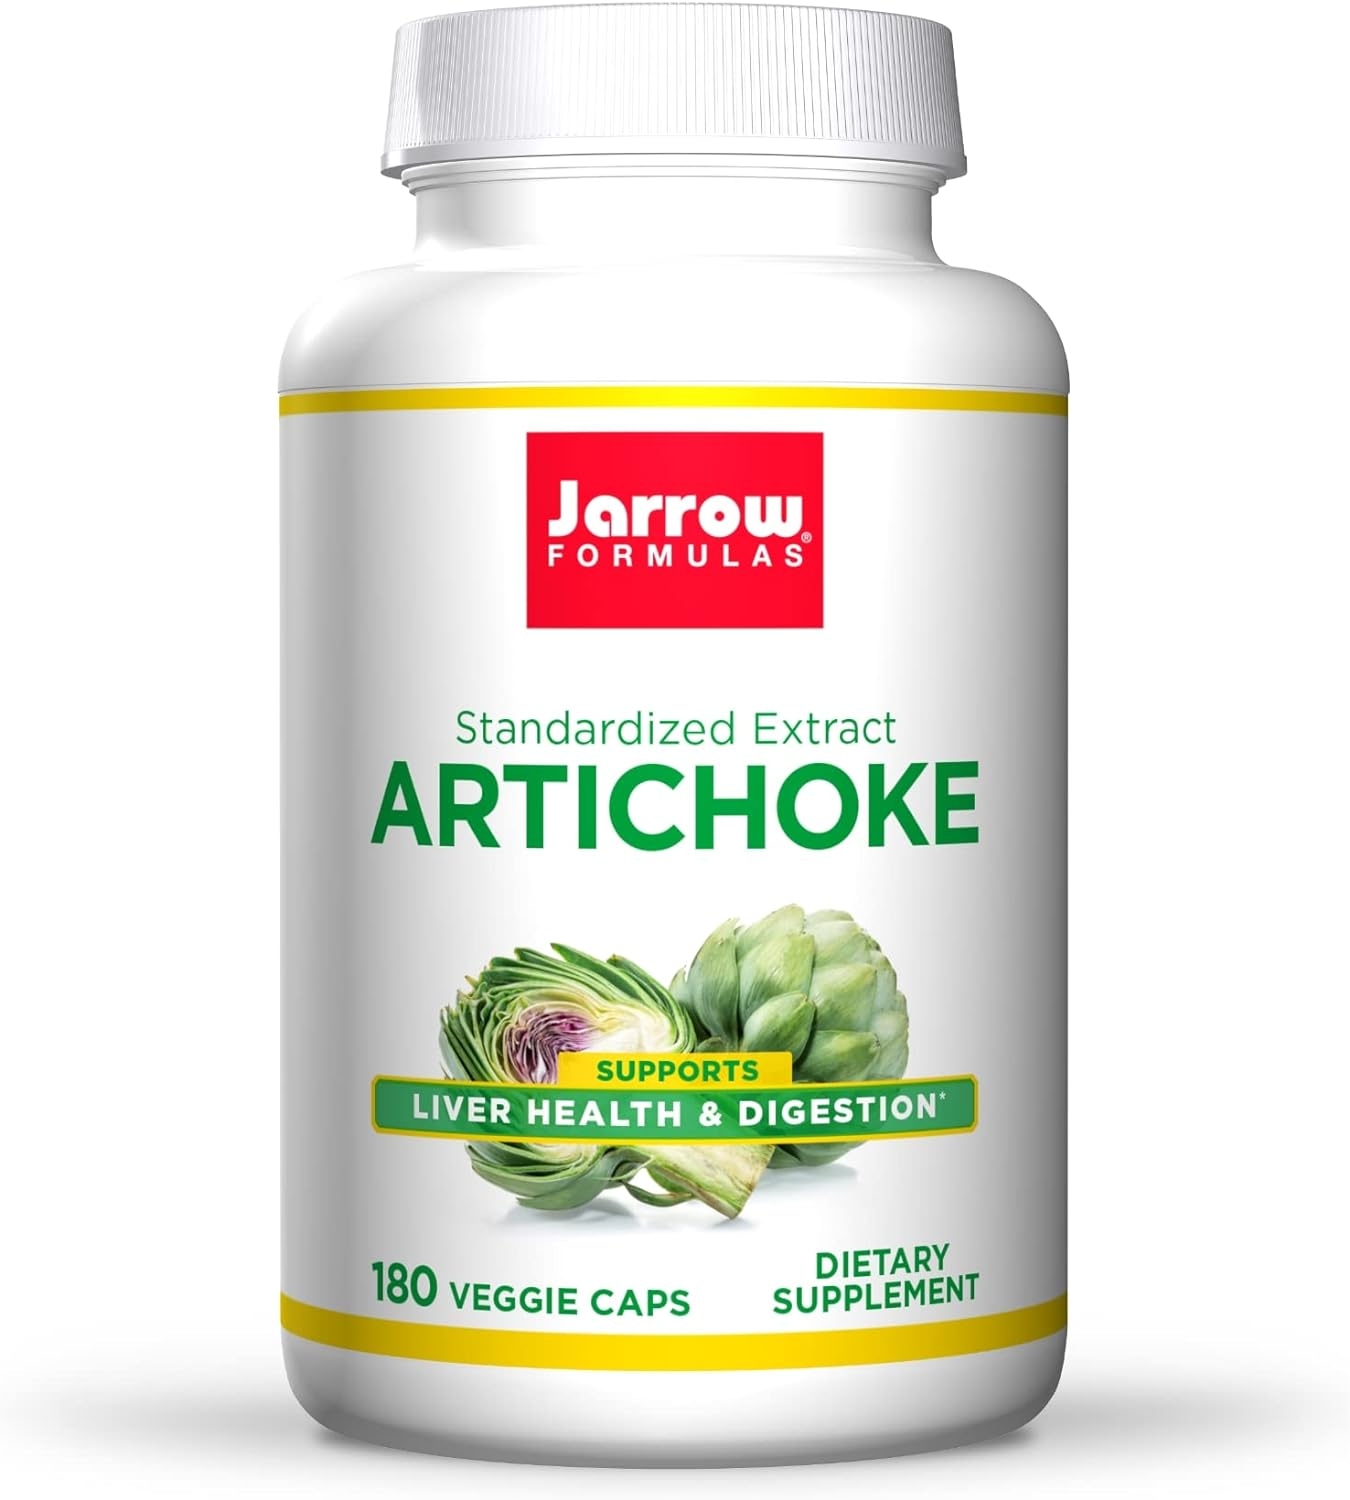 Jarrow Formulas Artichoke 500 mg - 180 Capsules - Standardized Extract - Supports Liver Health & Digestion - White 180 Servings